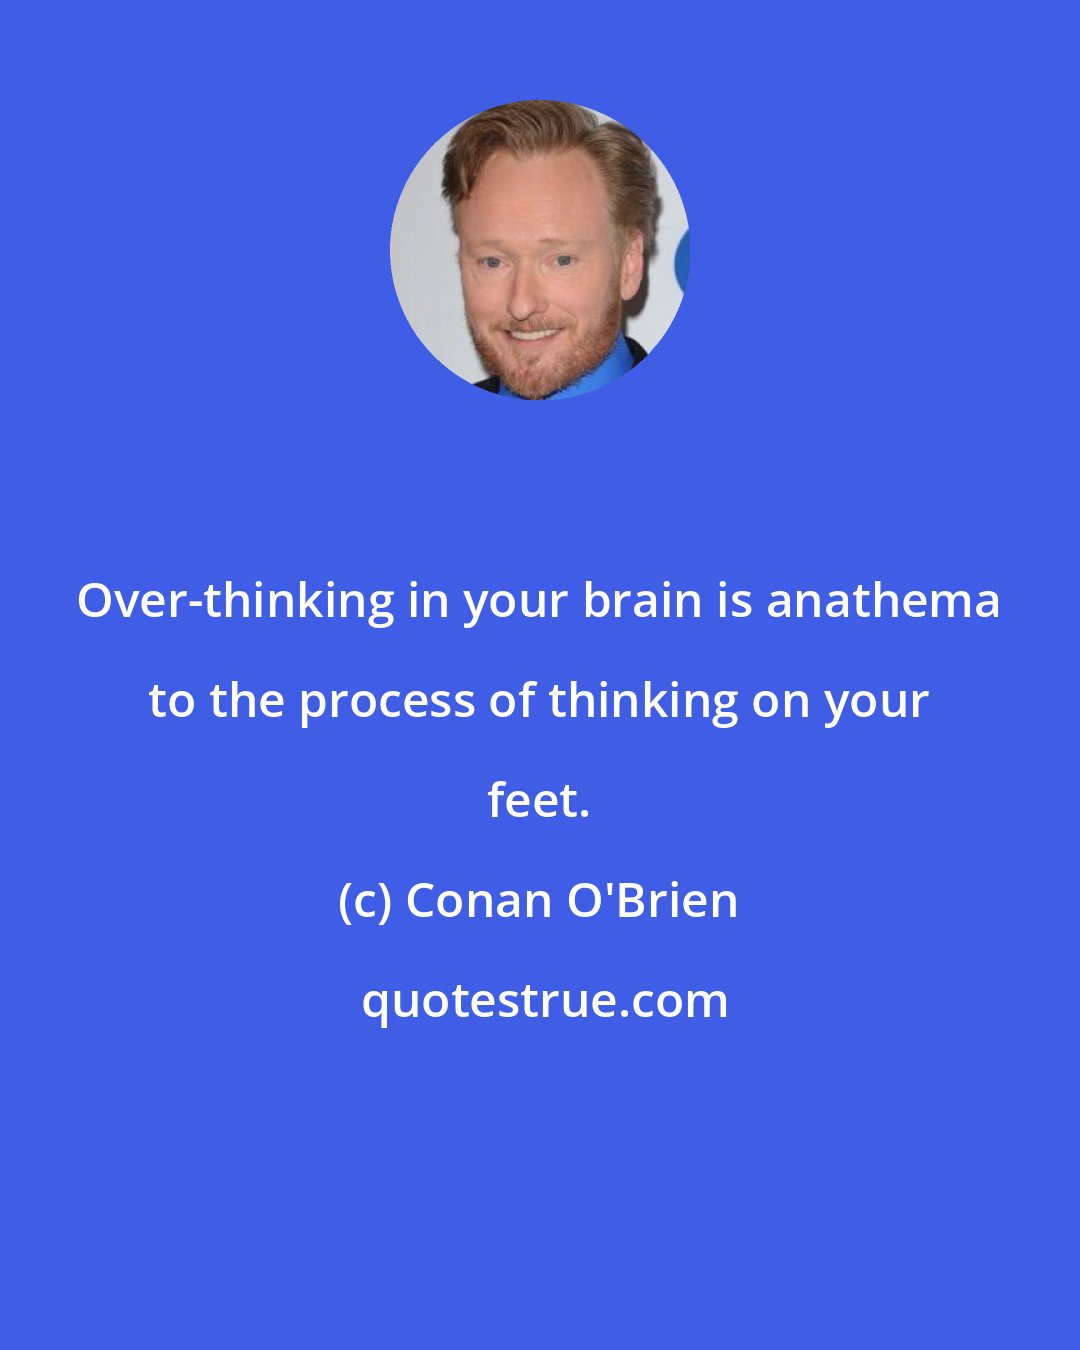 Conan O'Brien: Over-thinking in your brain is anathema to the process of thinking on your feet.